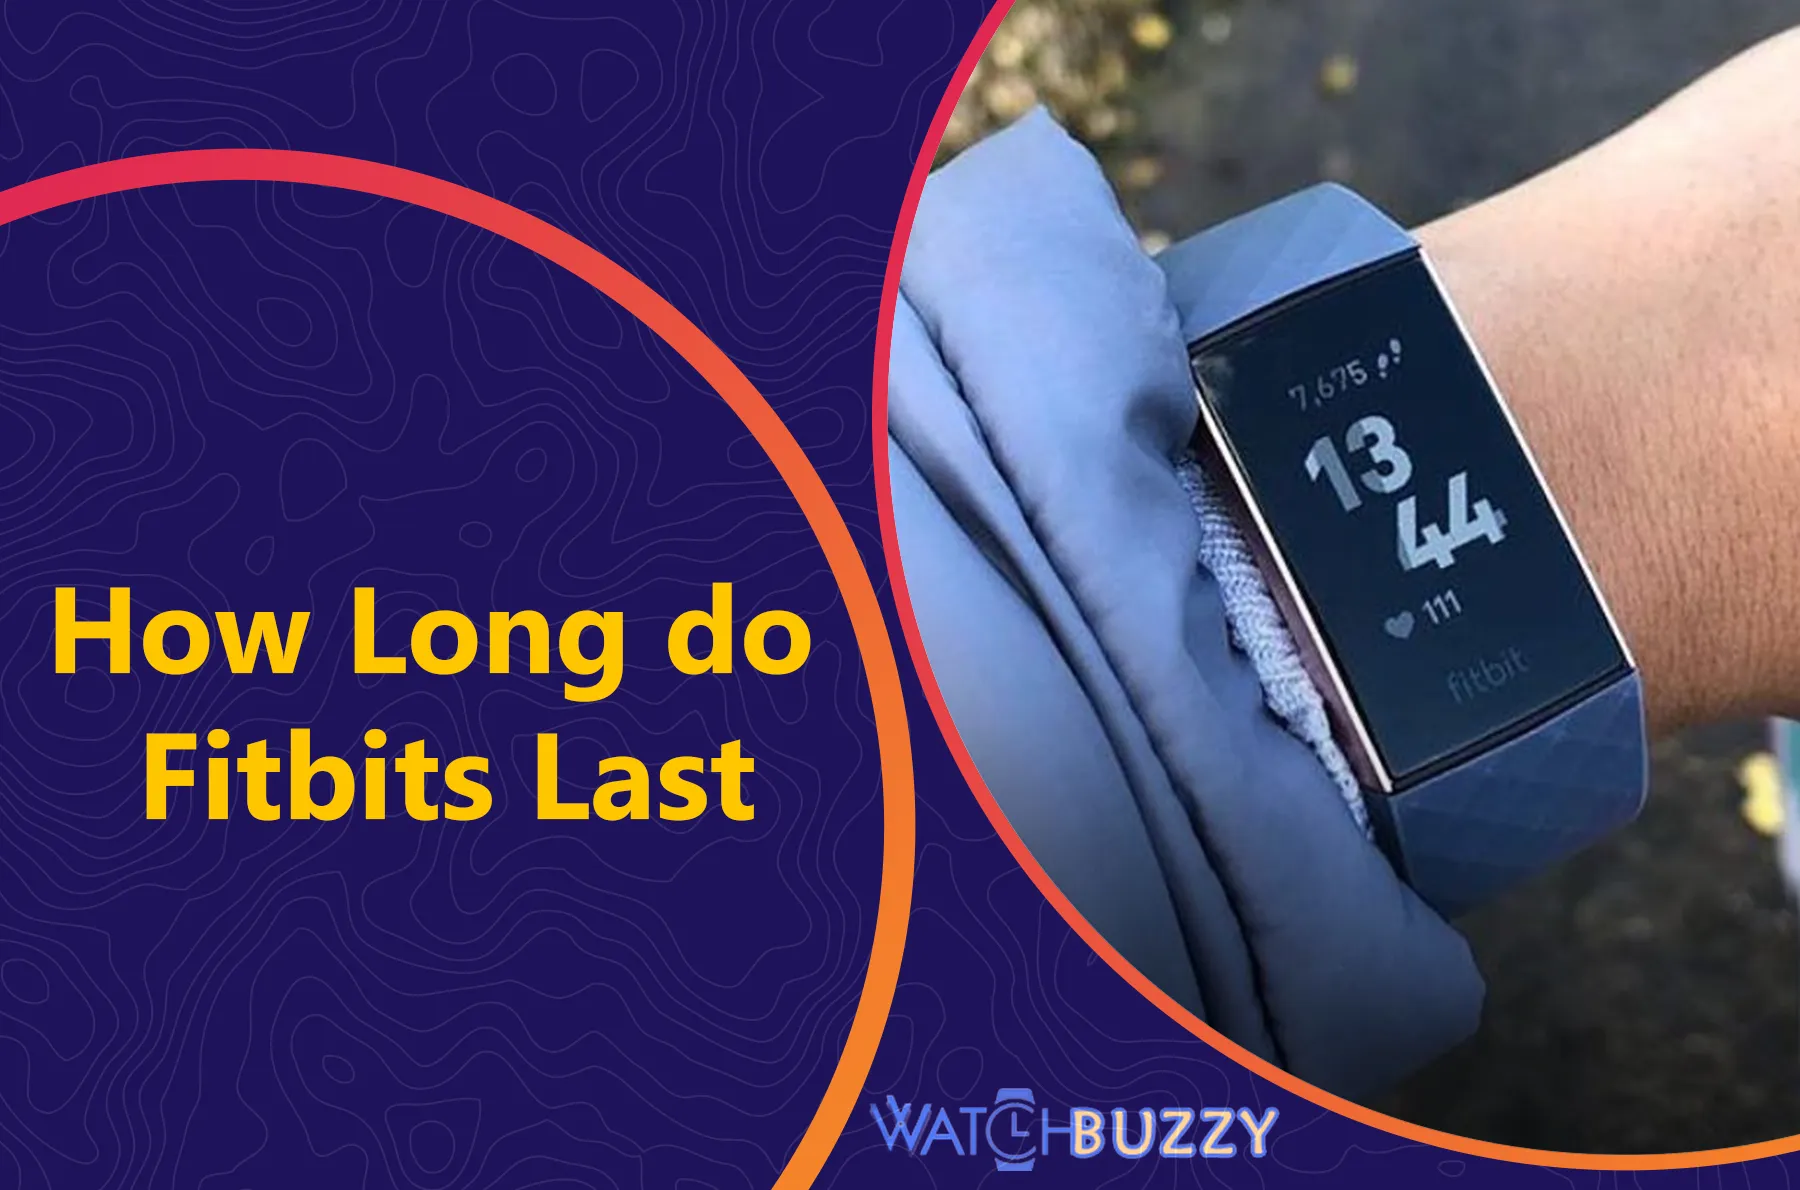 How Long do Fitbits Last